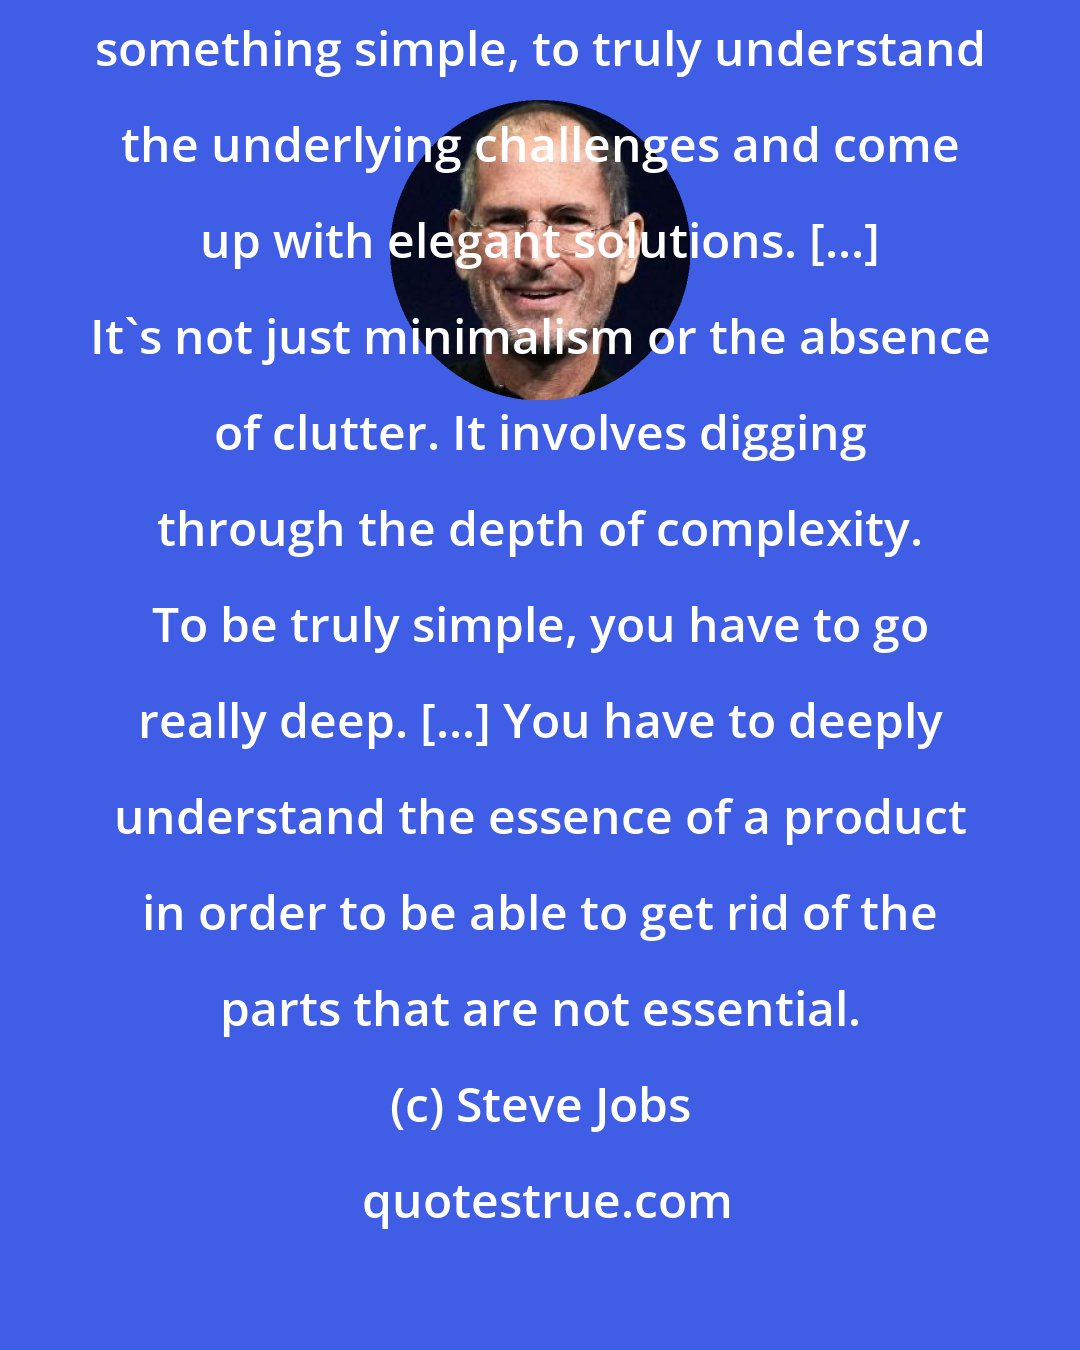 Steve Jobs: Simplicity is the ultimate sophistication. It takes a lot of hard work to make something simple, to truly understand the underlying challenges and come up with elegant solutions. [...] It's not just minimalism or the absence of clutter. It involves digging through the depth of complexity. To be truly simple, you have to go really deep. [...] You have to deeply understand the essence of a product in order to be able to get rid of the parts that are not essential.